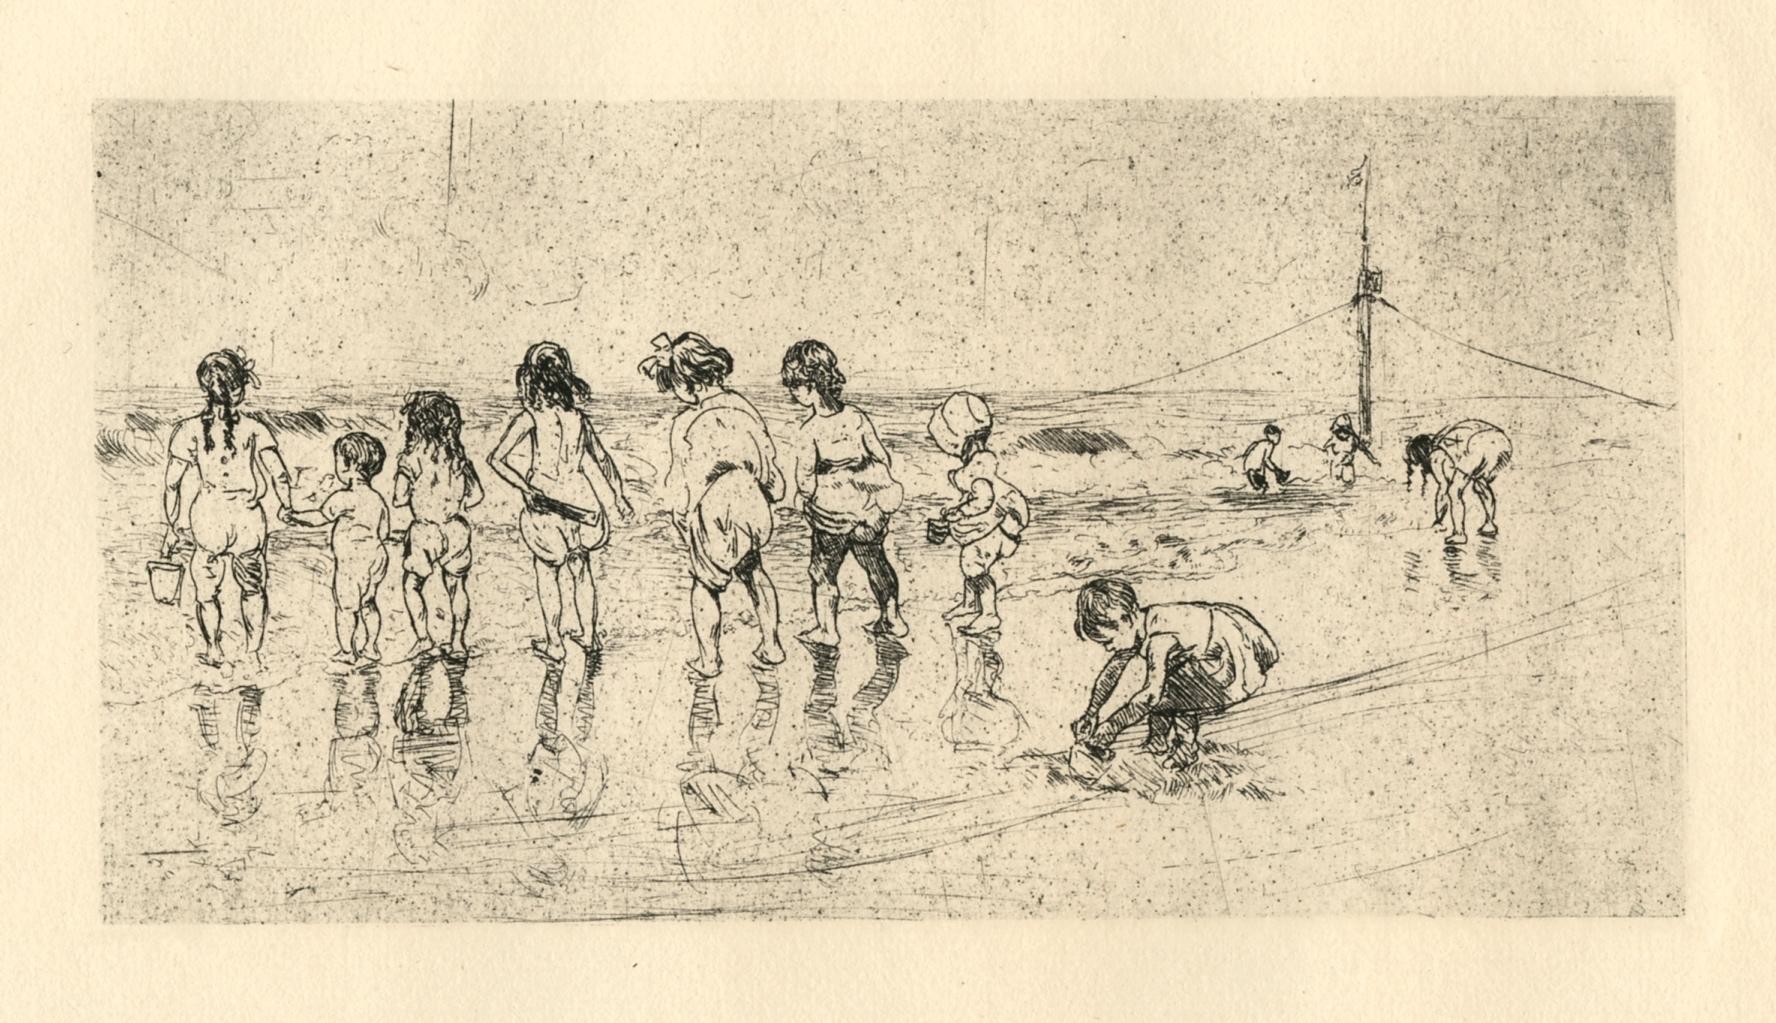 "Coney Island" original etching - Print by Maurice Sterne